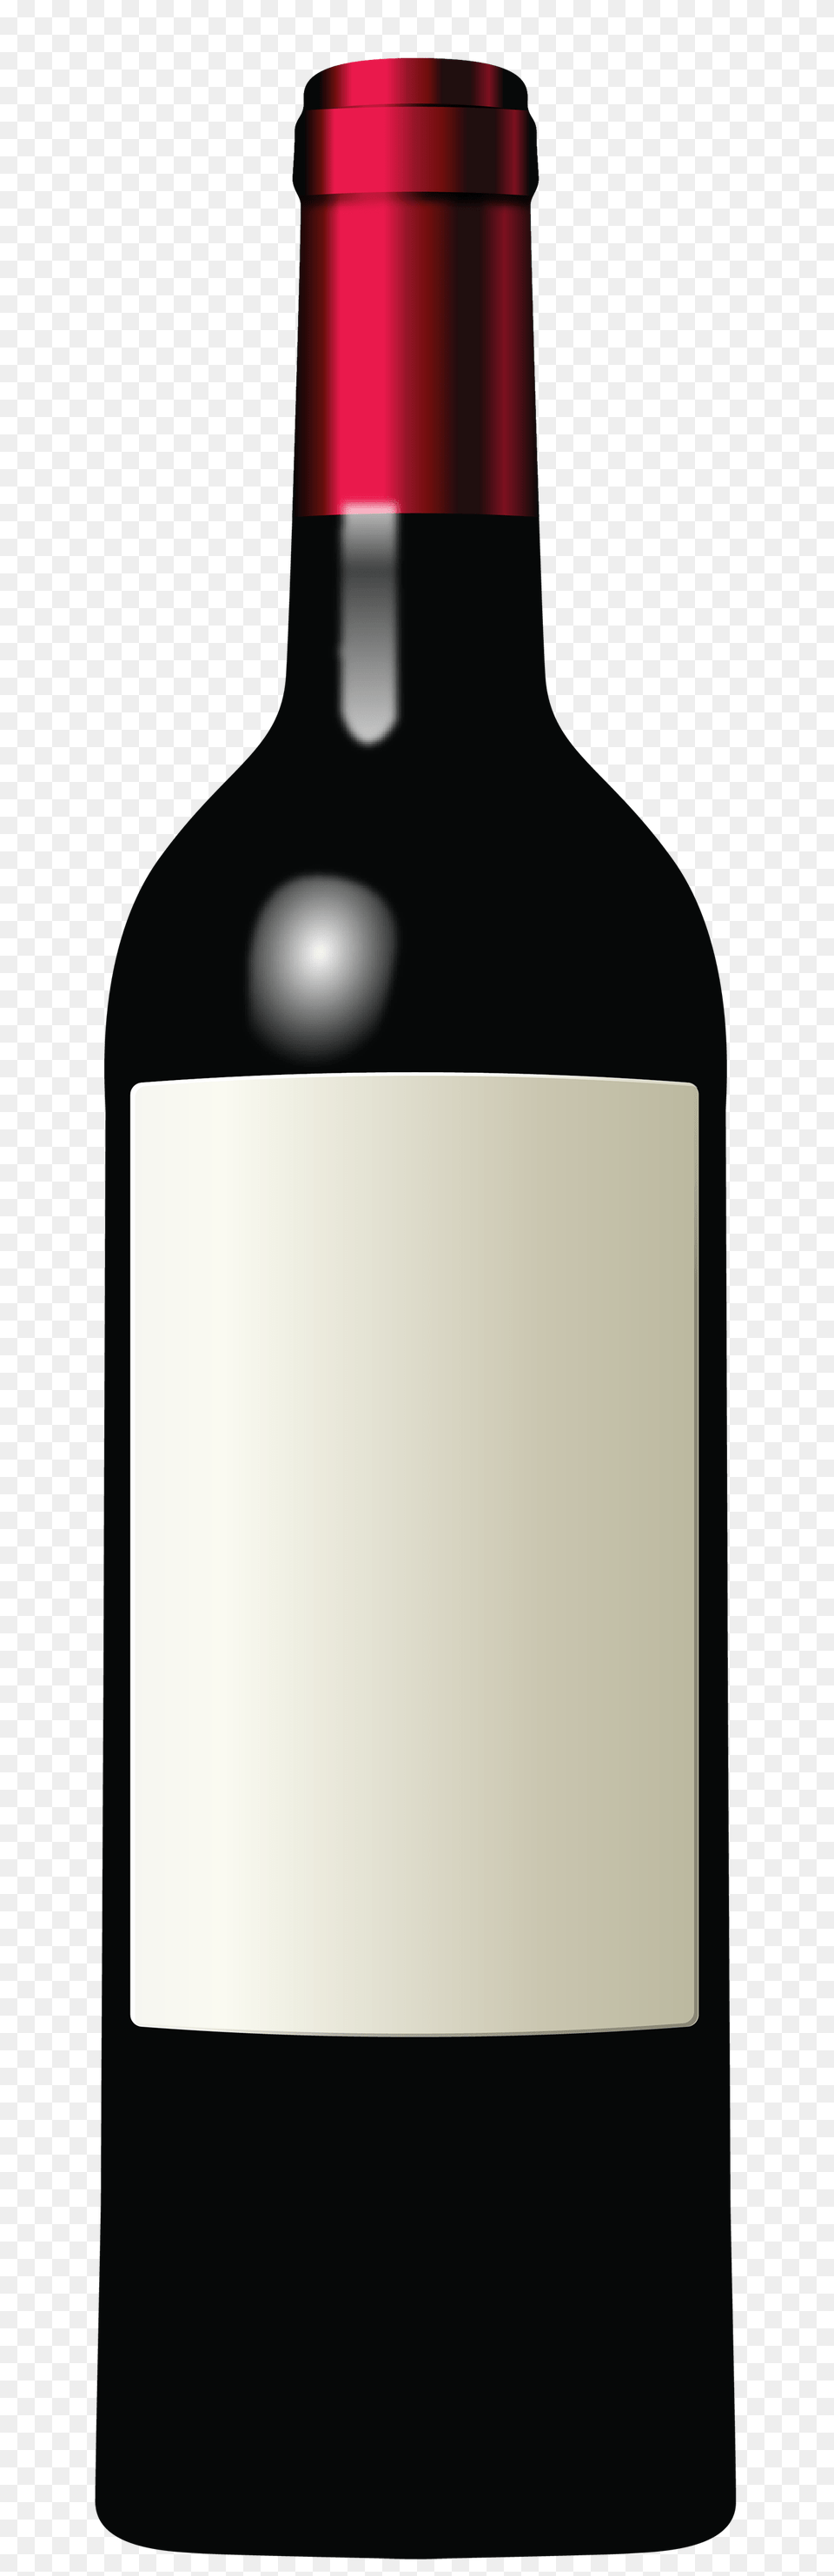 Whiskey Bottle And Glass Clip Art, Alcohol, Beverage, Liquor, Wine Png